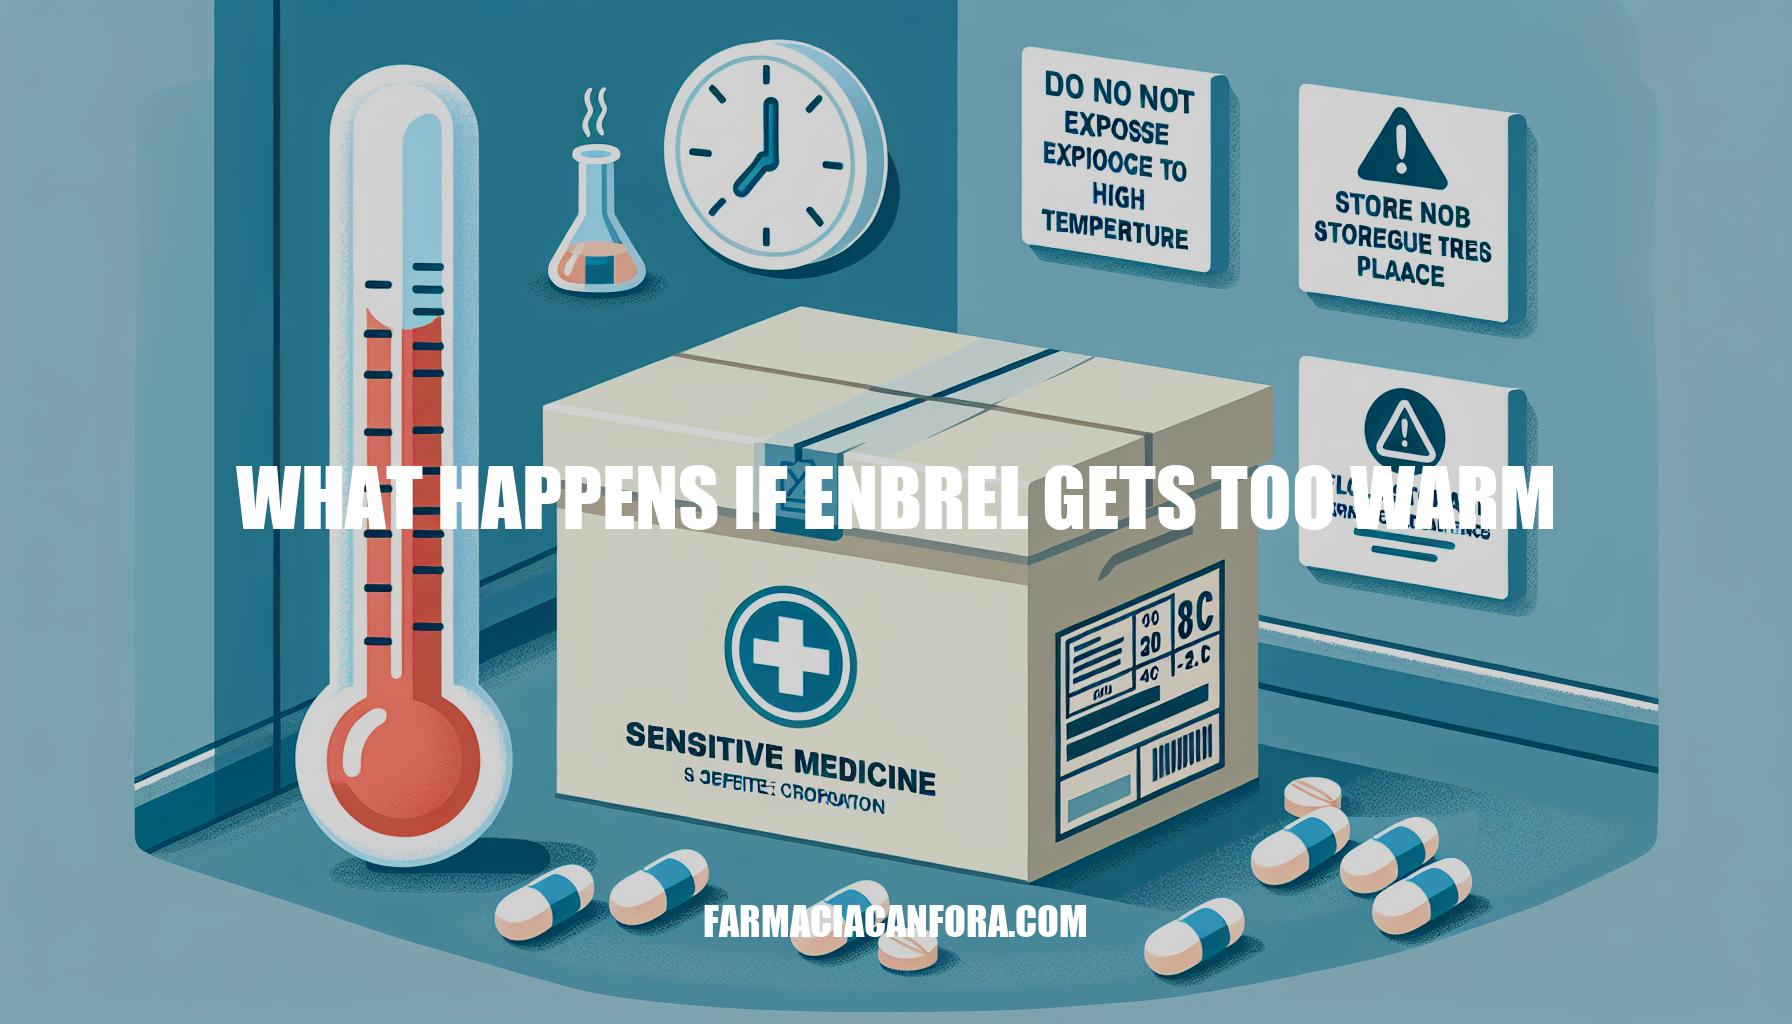 What Happens If Enbrel Gets Too Warm: Storage Guidelines and Safety Precautions